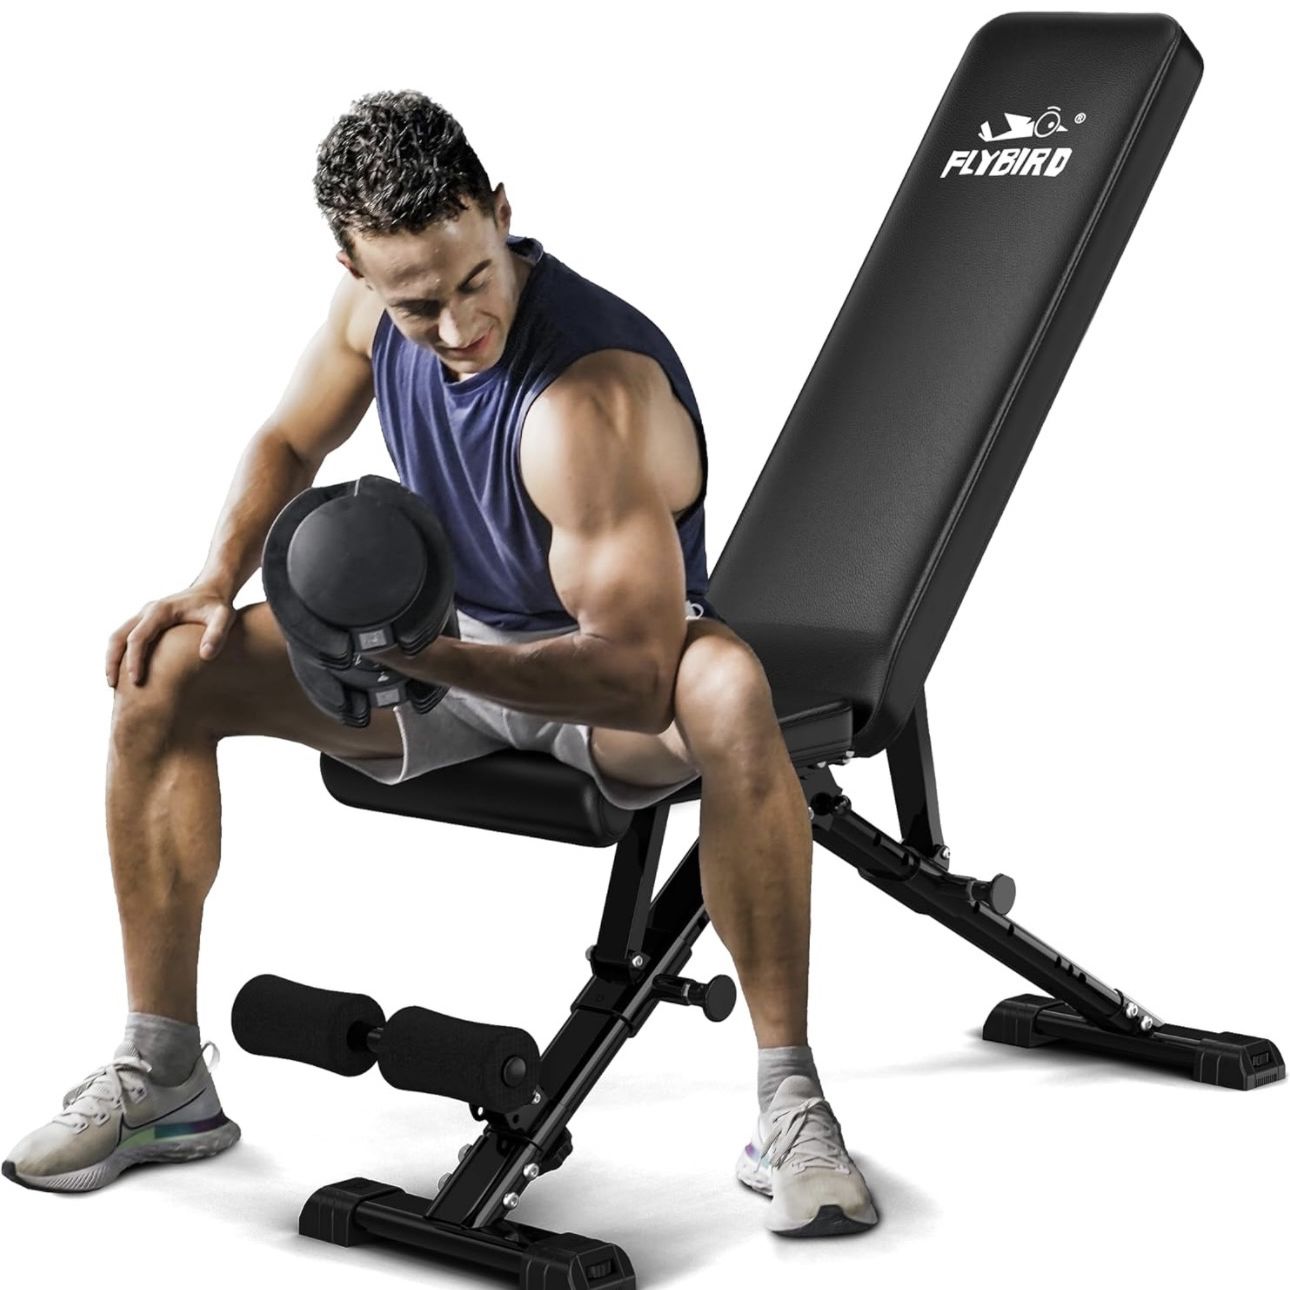 Weight Strength Training Bench - Adjustable and Fast Folding